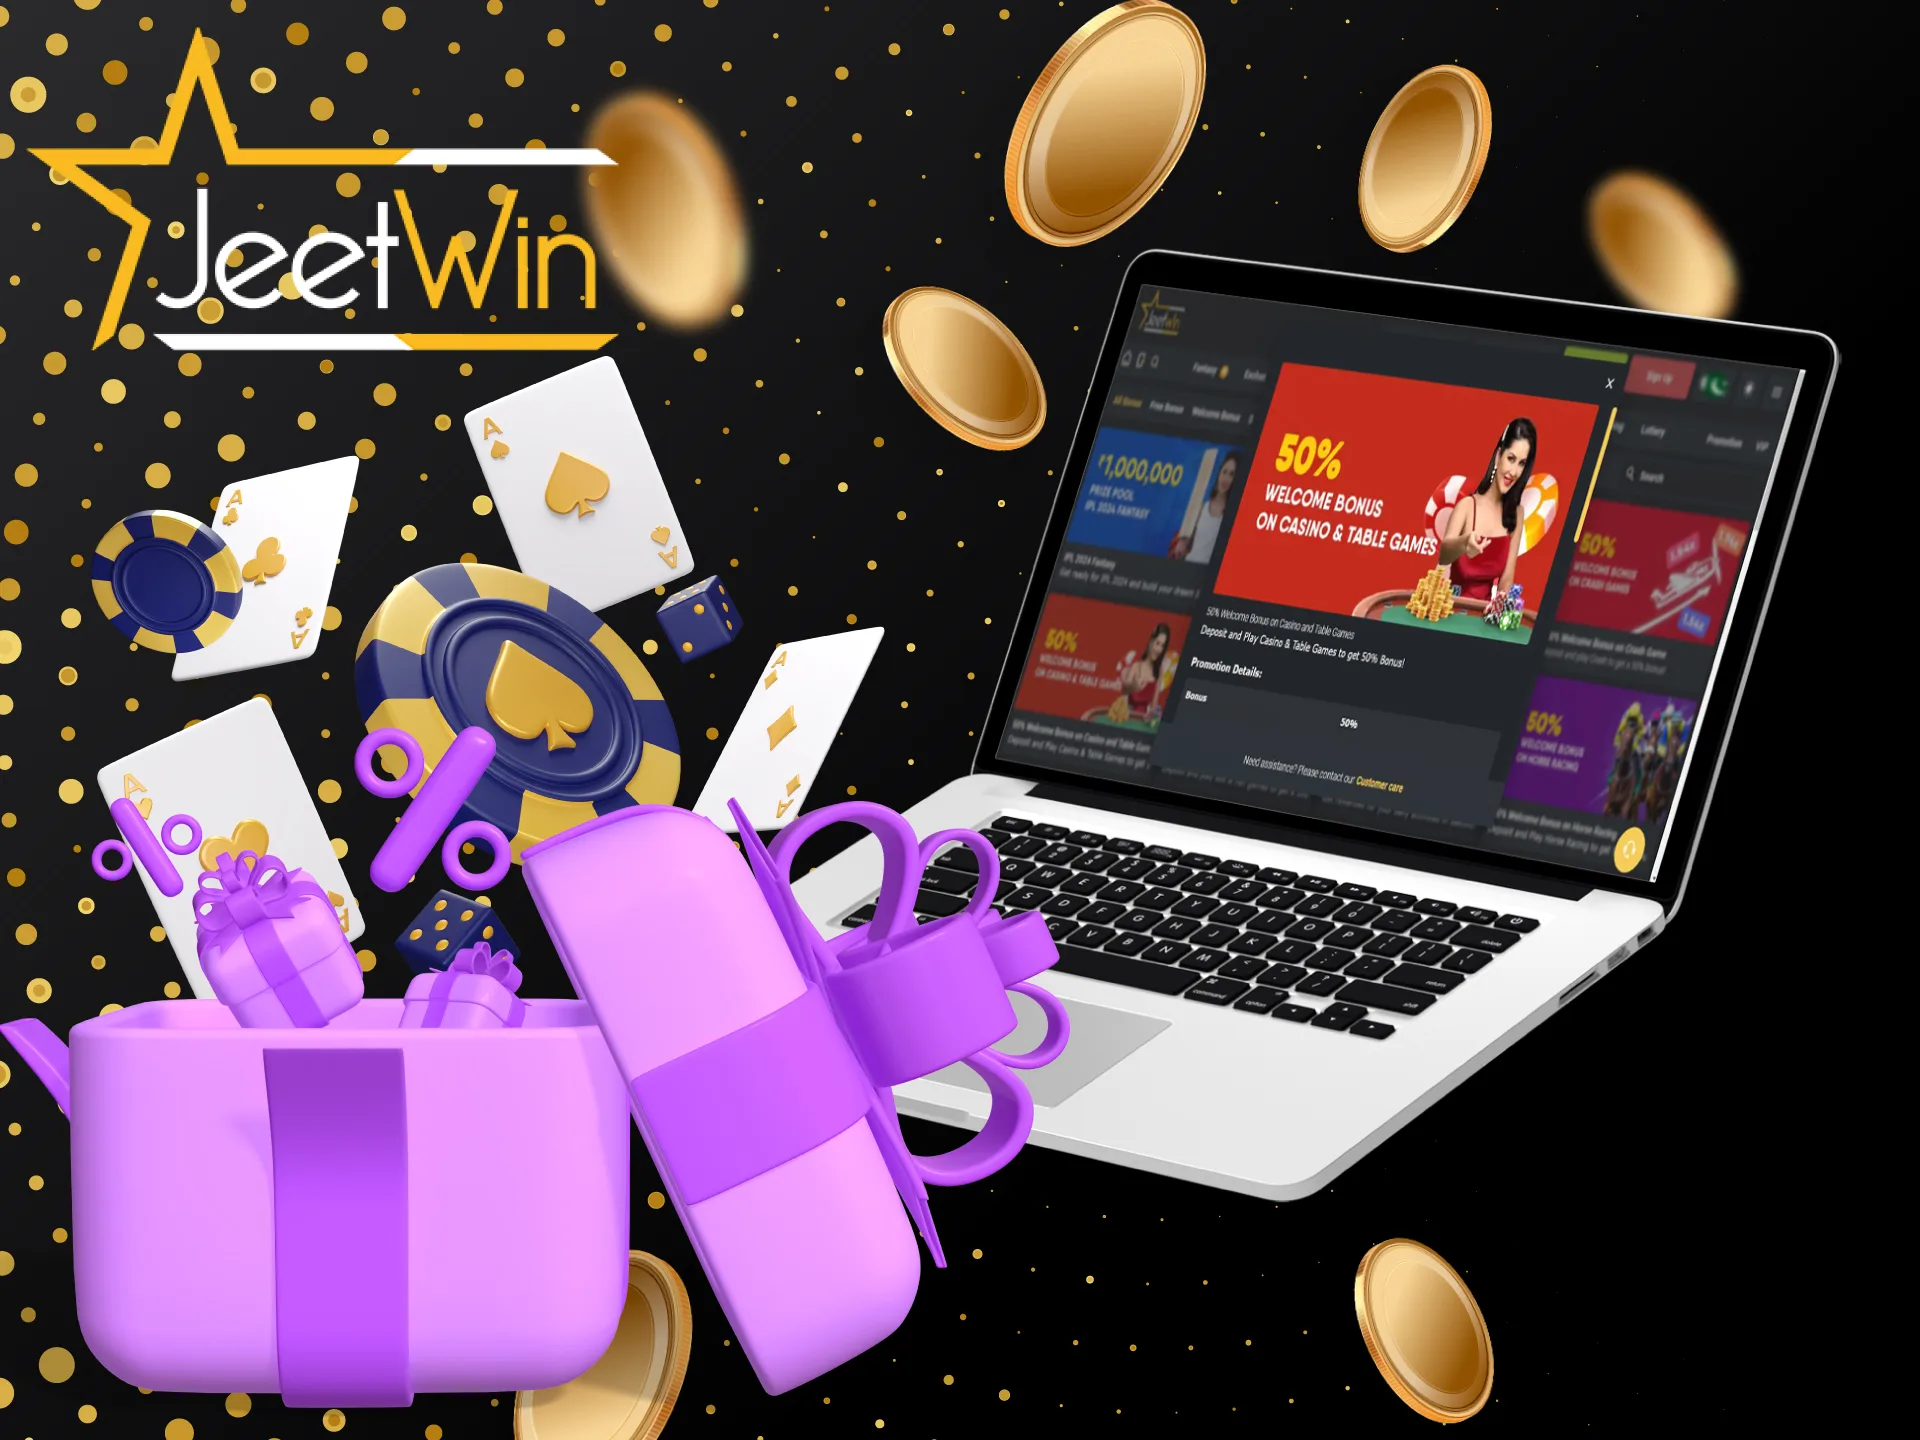 Don't miss the chance to get JeetWin bonuses and enjoy playing table games.